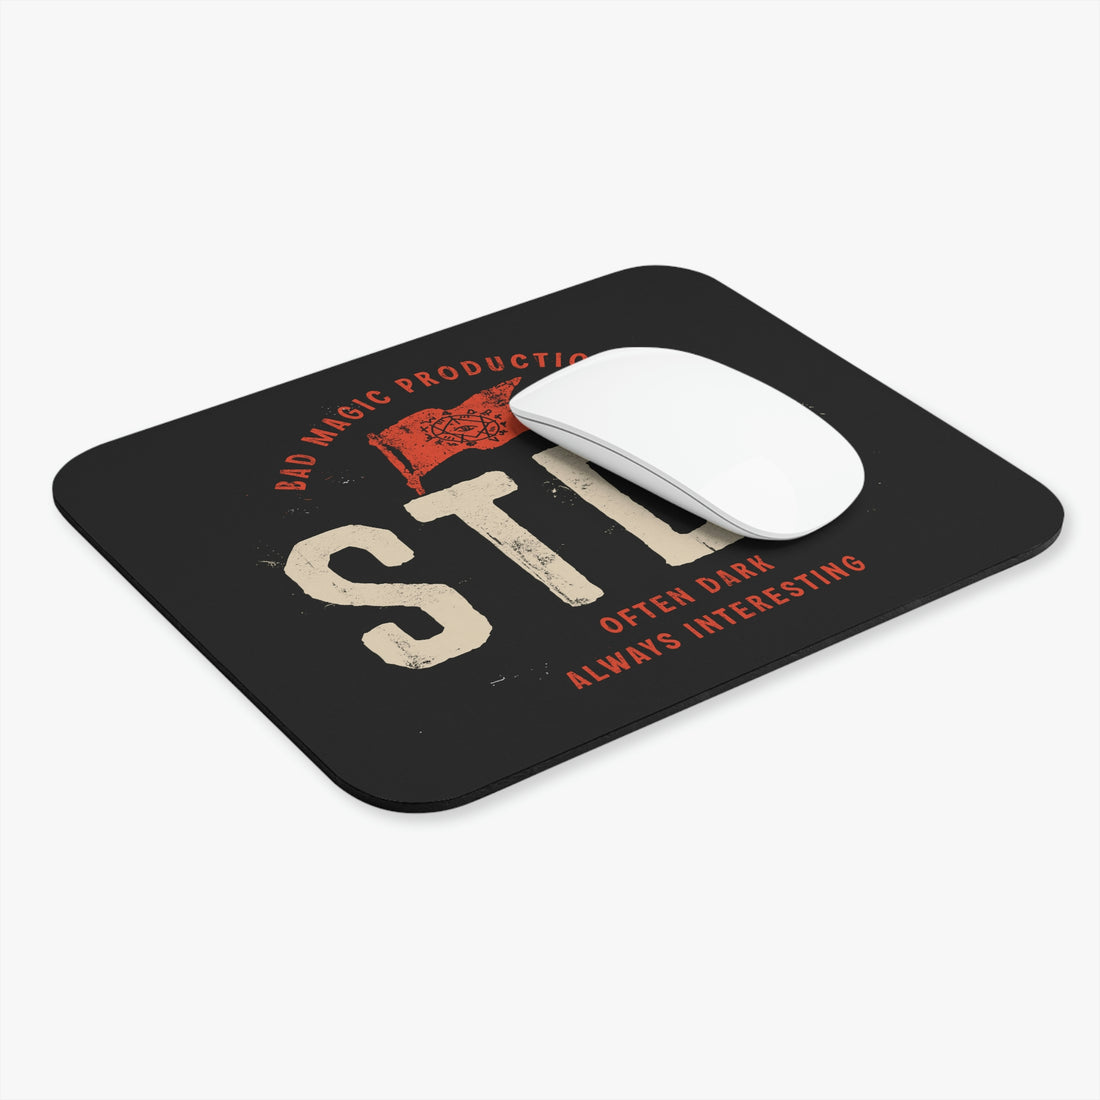 STDP Yesteryear Mouse Pad